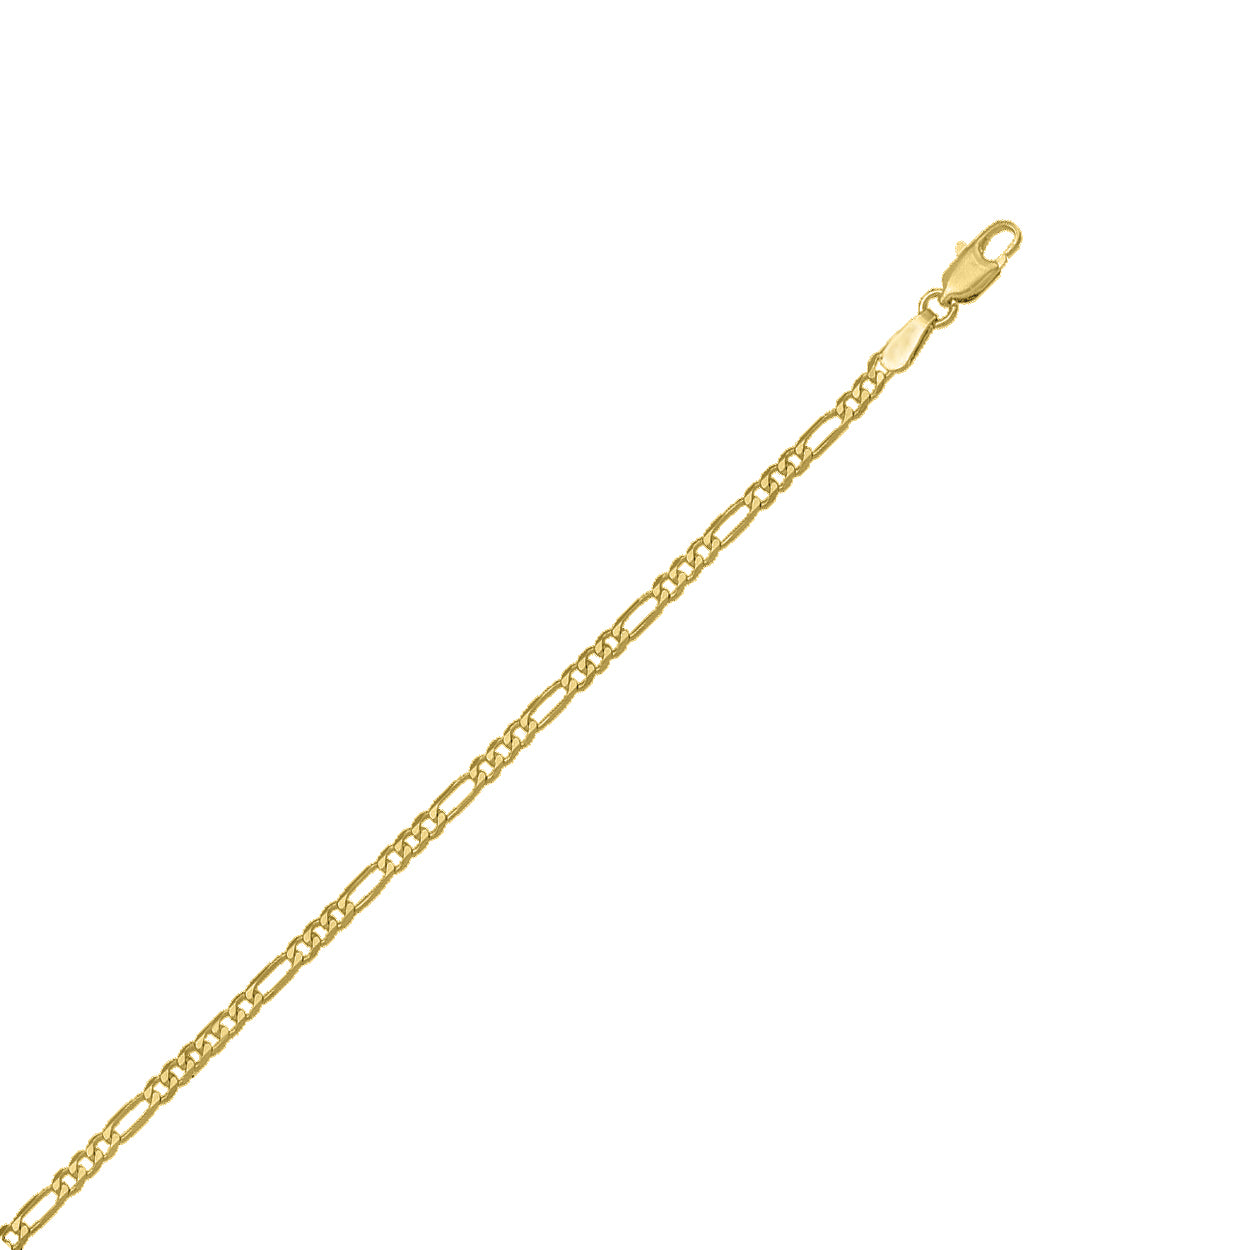 18kt Yellow Gold Figaro Style Bracelet with 2.4mm Width